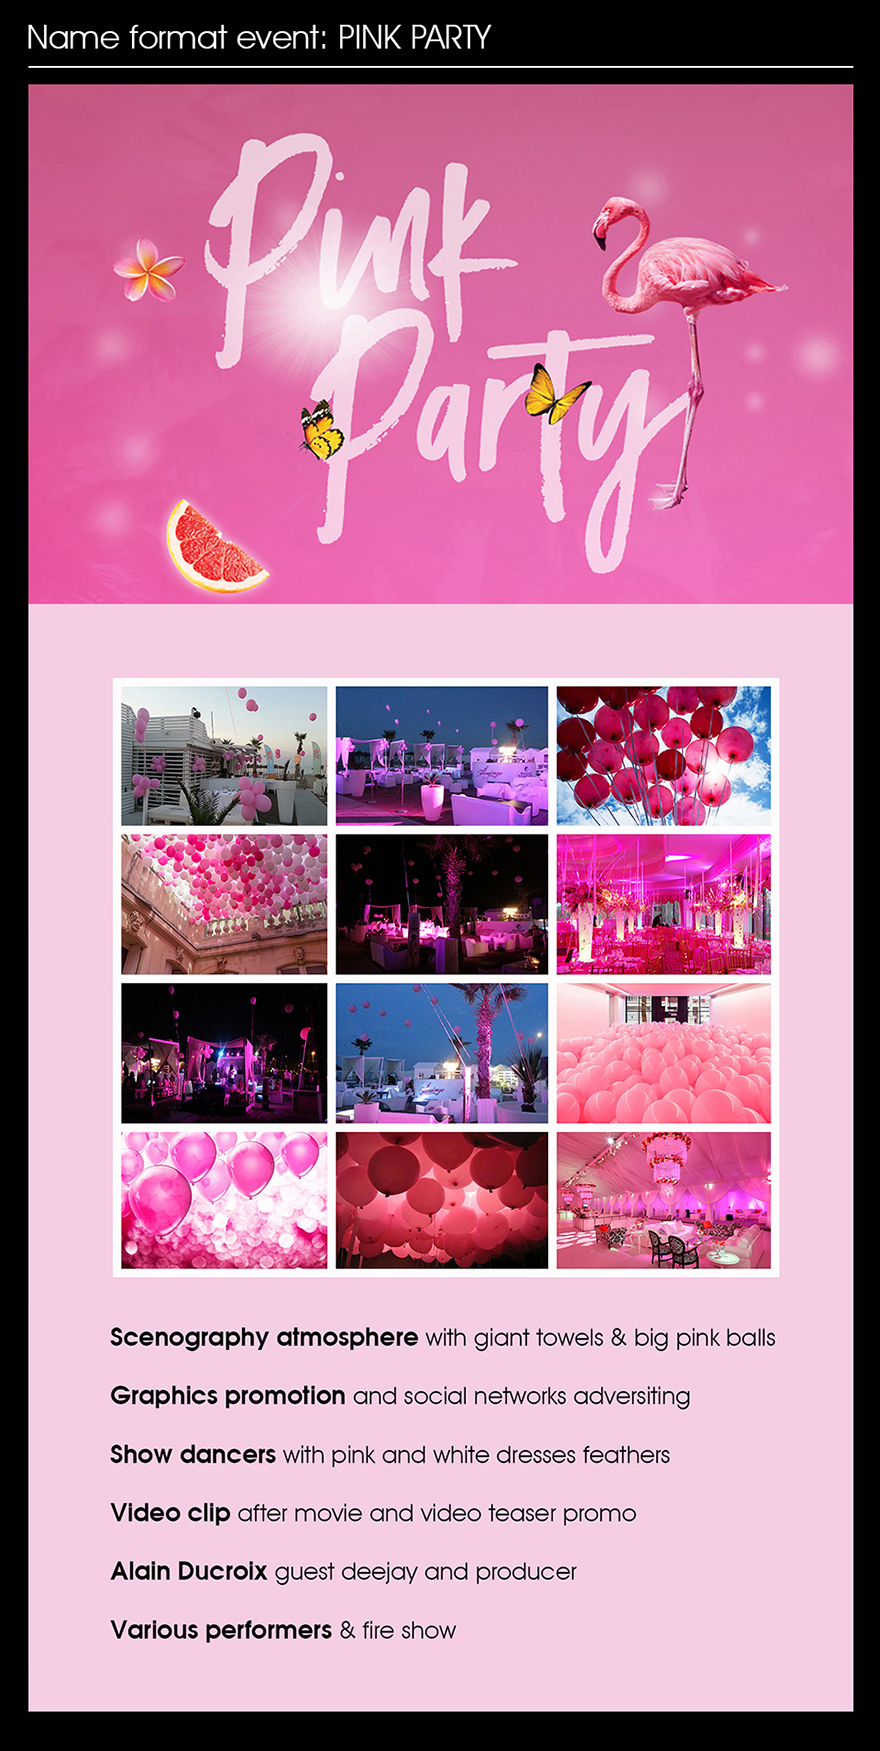 1PINK-PARTY-OFFICIAL